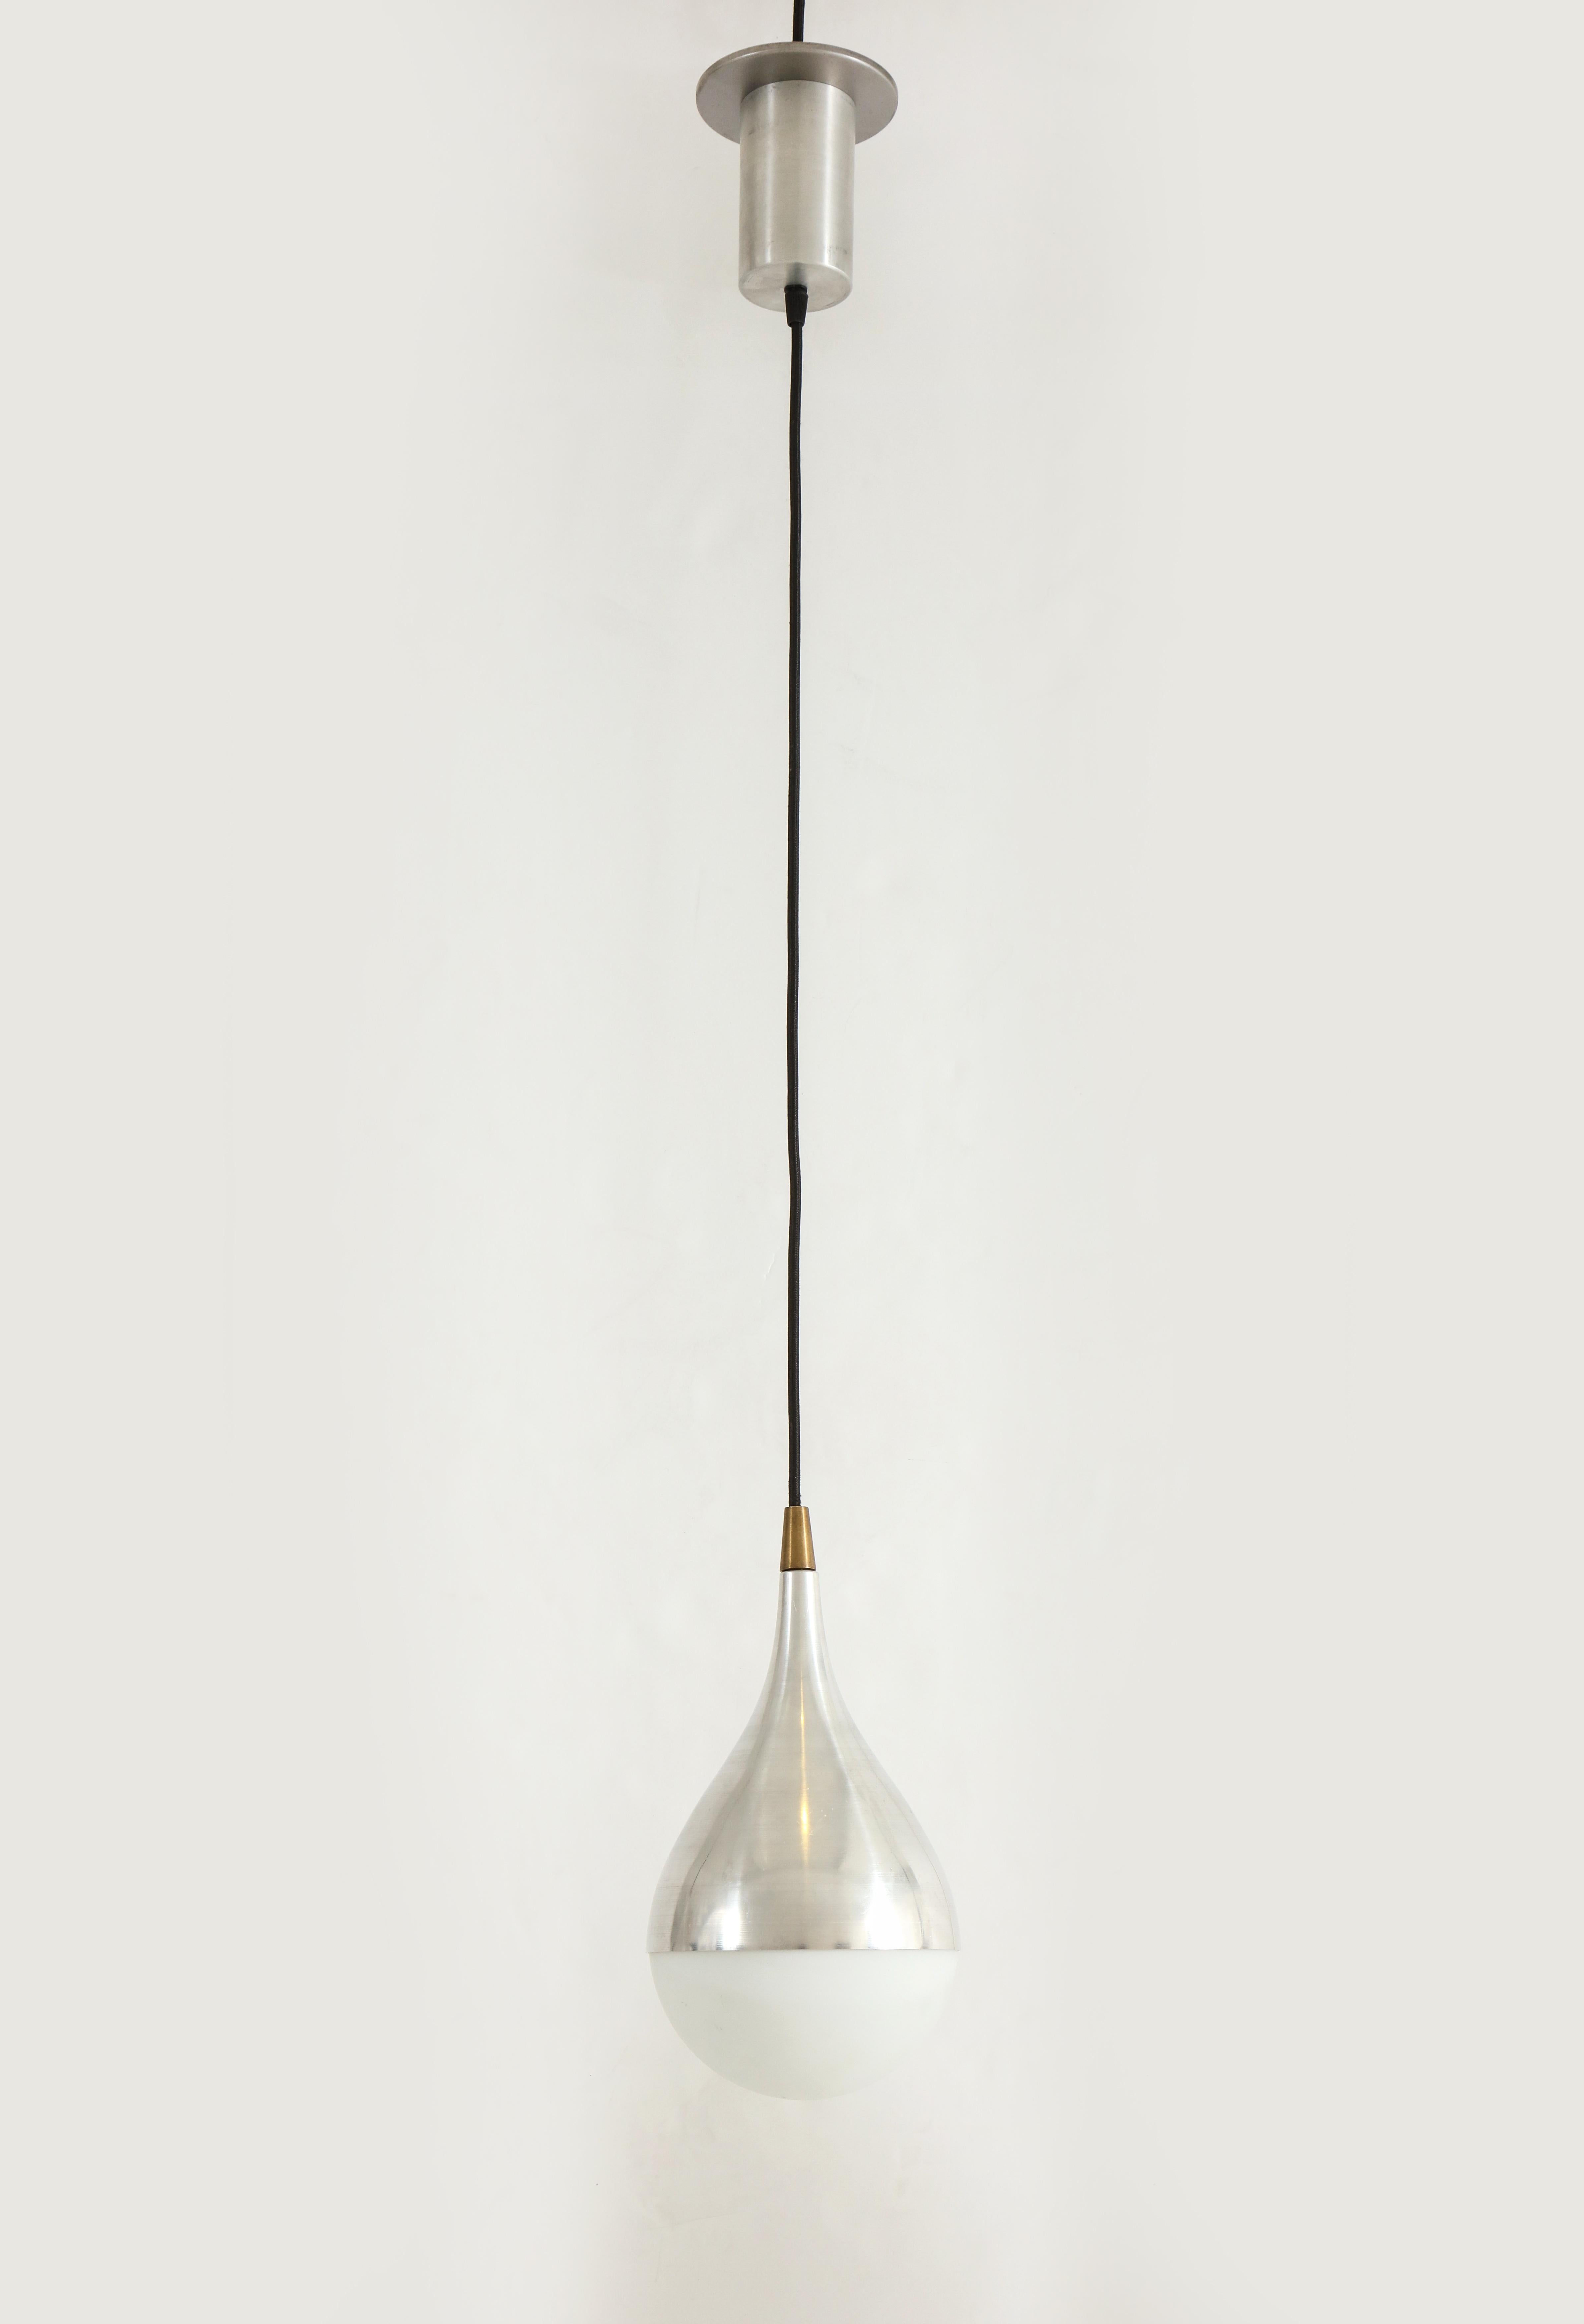 Pair of rare pendants each with opaline glass globe shades held by brushed aluminum and brass fittings suspended by cable and original brushed aluminum canopy. This iconic Stilnovo model displays an elegantly simple teardrop shape.  Its beautiful